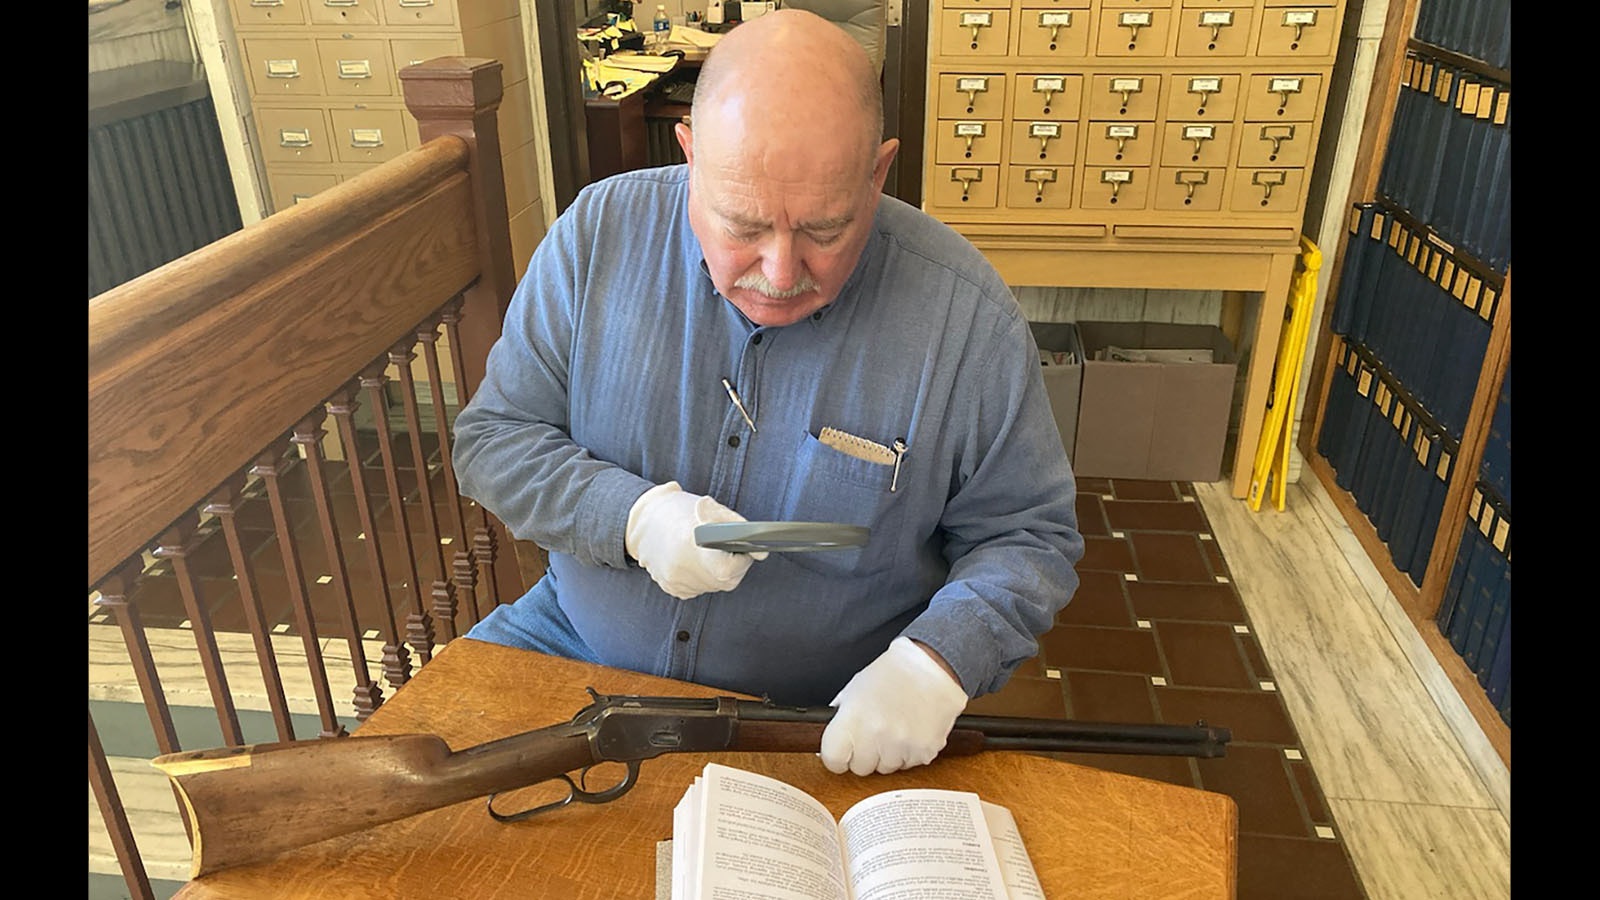 A retired law enforcement officer, Dick Blust now uses his lifelong love for firearms to research and study vintage, rare and unusual guns.